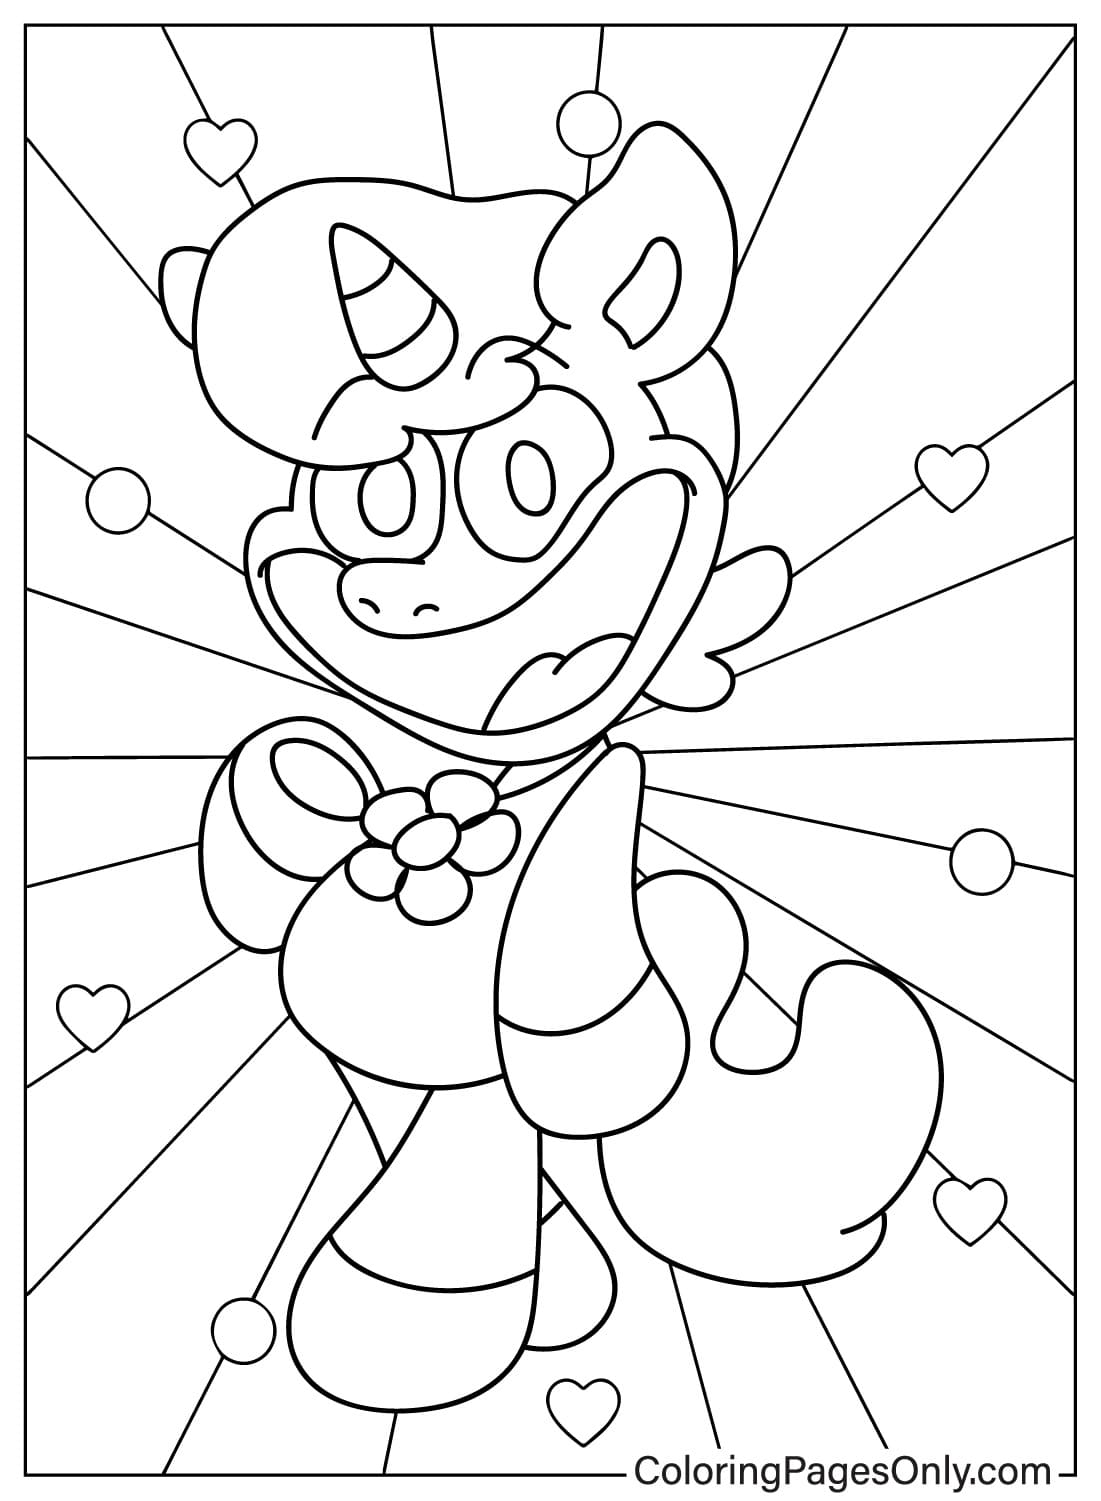 CraftyCorn Coloring Page from CraftyCorn